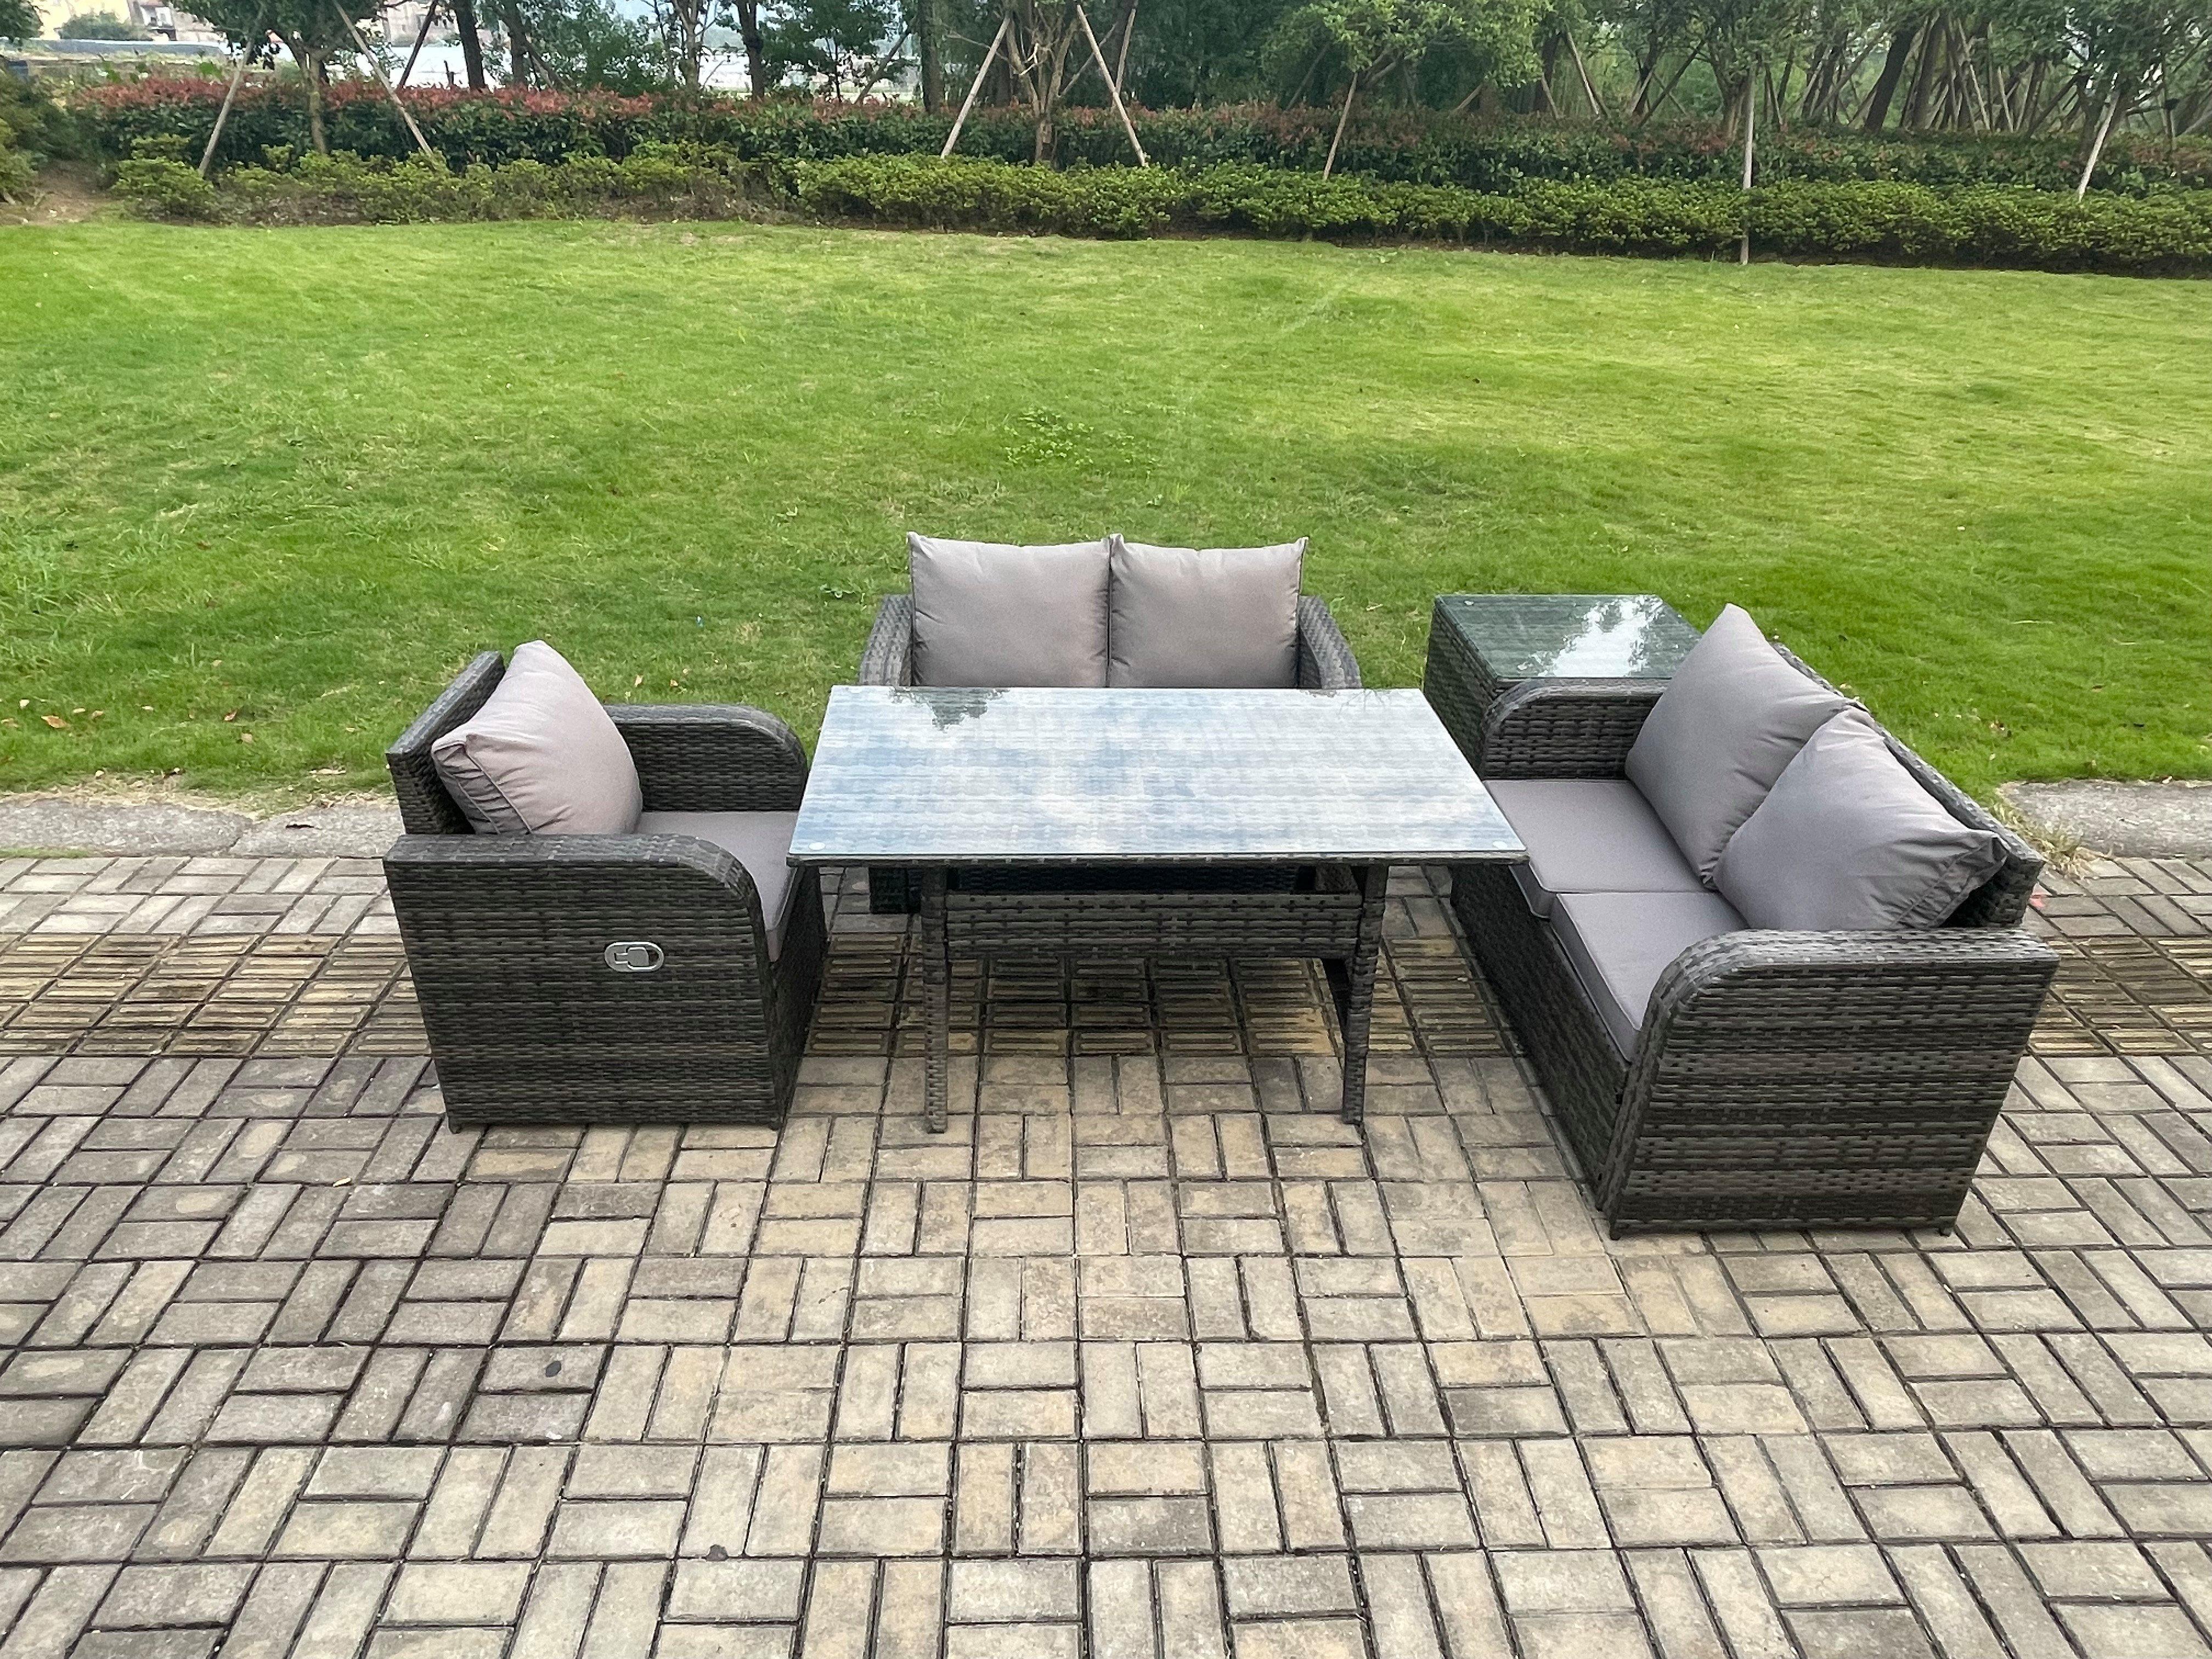 Lounge Rattan Sofa Set Outdoor Garden Furniture Oblong Rectangular Dining Table With Chairs Side Tab